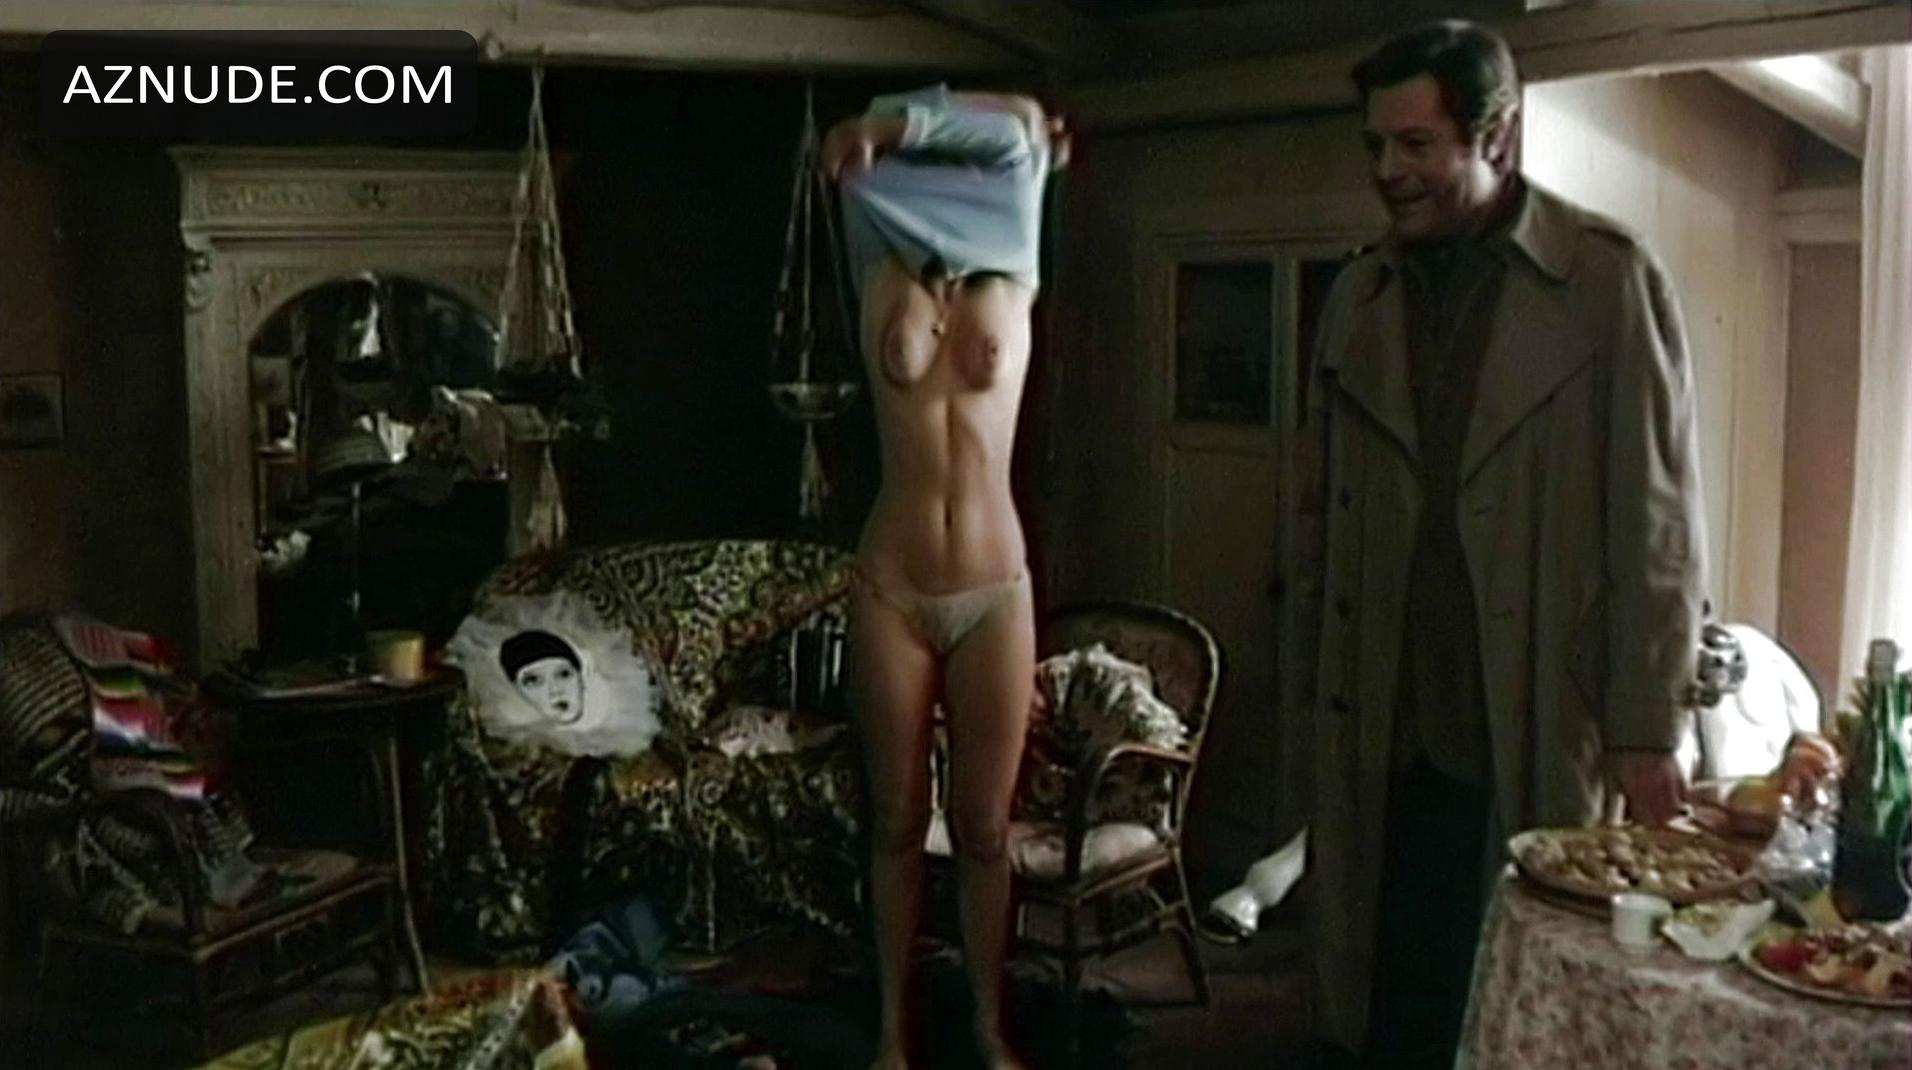 Stay As You Are Nude Scenes Aznude